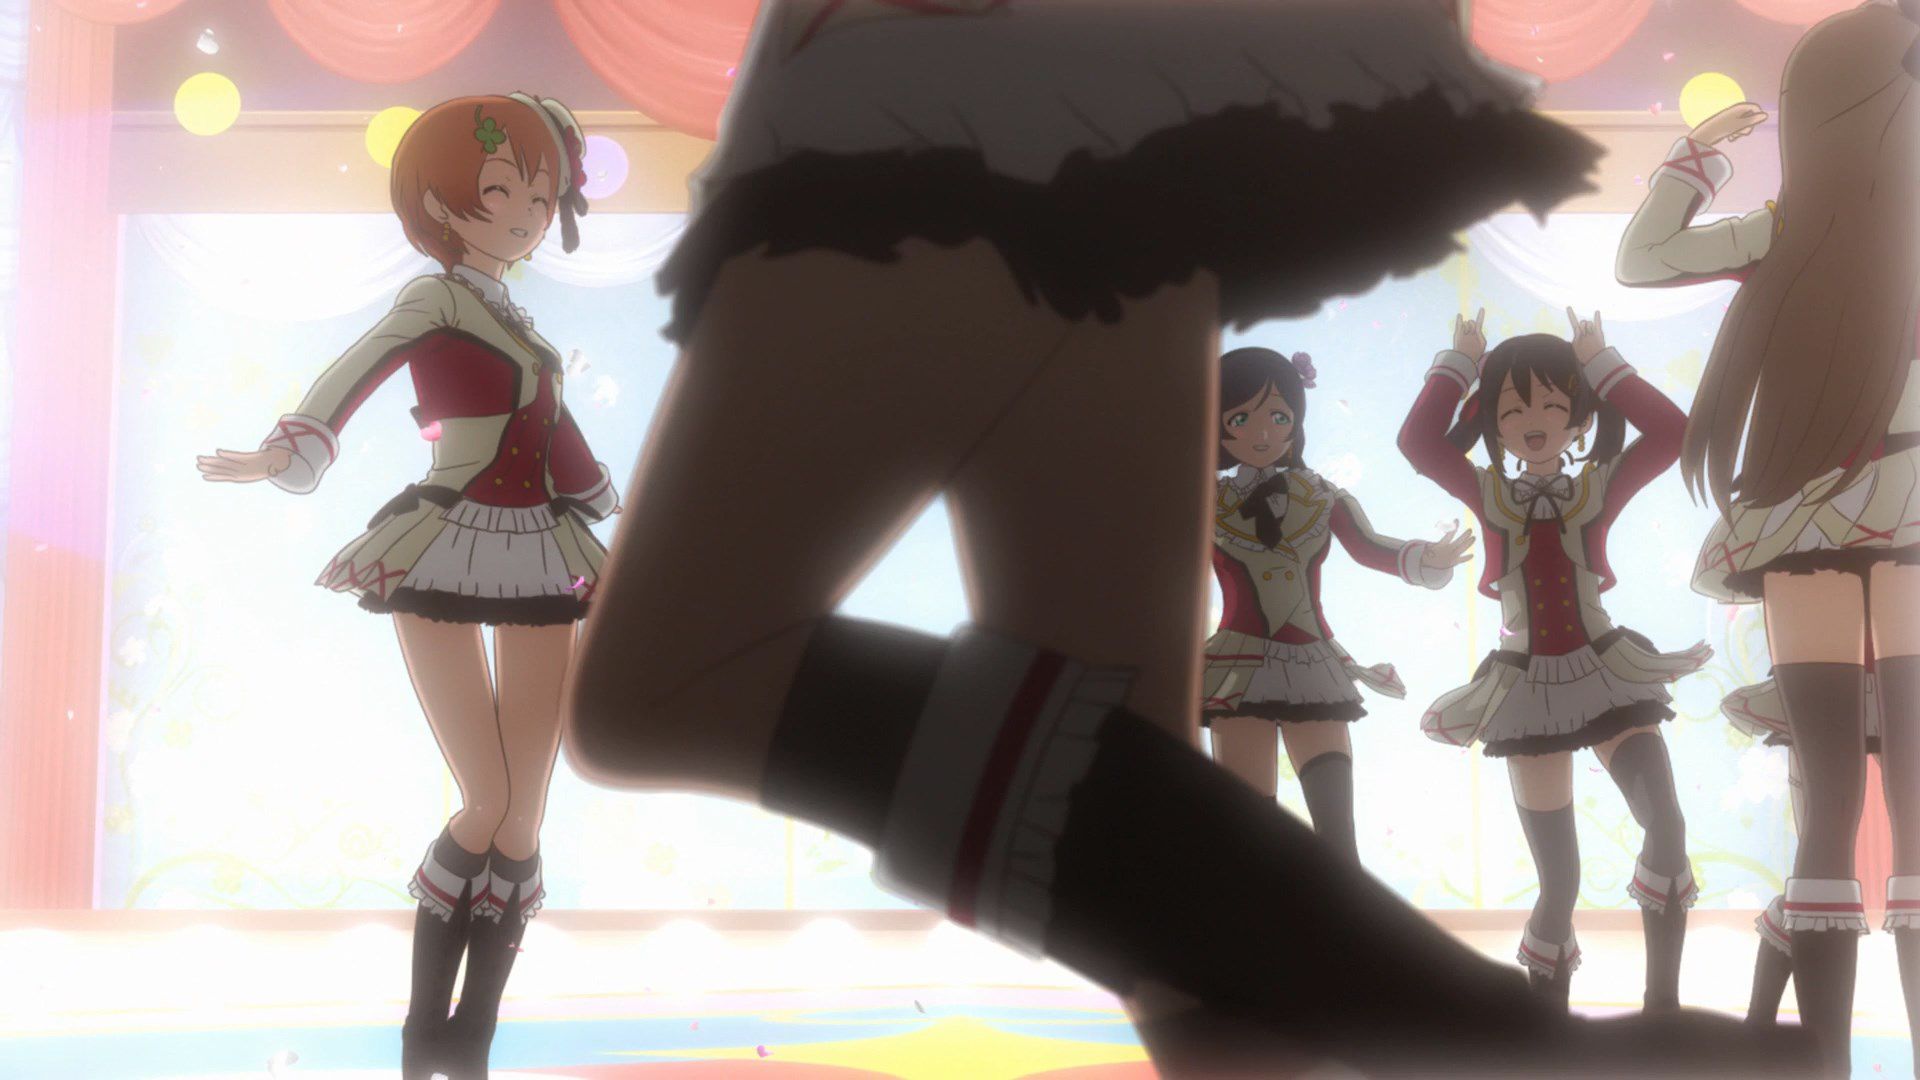 [God images] "love live! ' Μm ' PV's leg is too erotic everyone wakes up to a leg fetish of wwwww 59